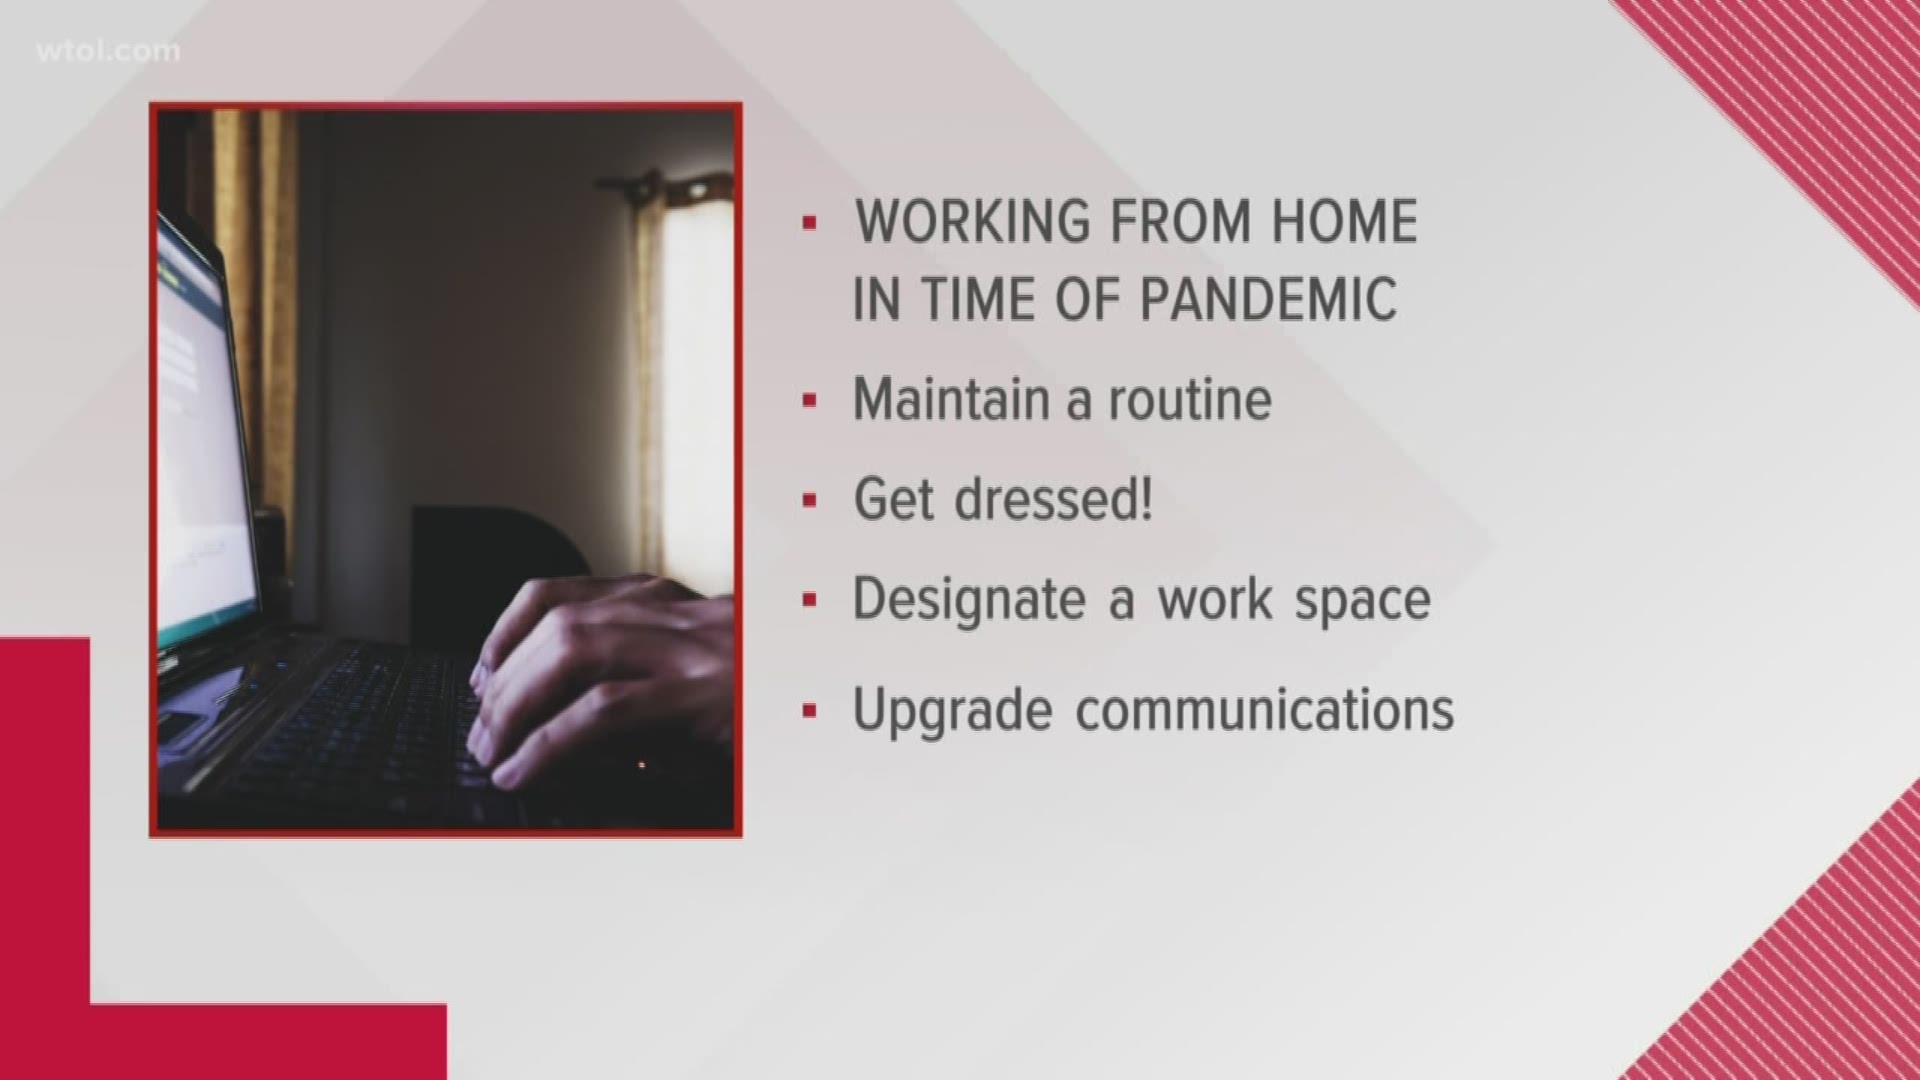 Thread Marketing has some tips on working from home during the COVID-19 pandemic.